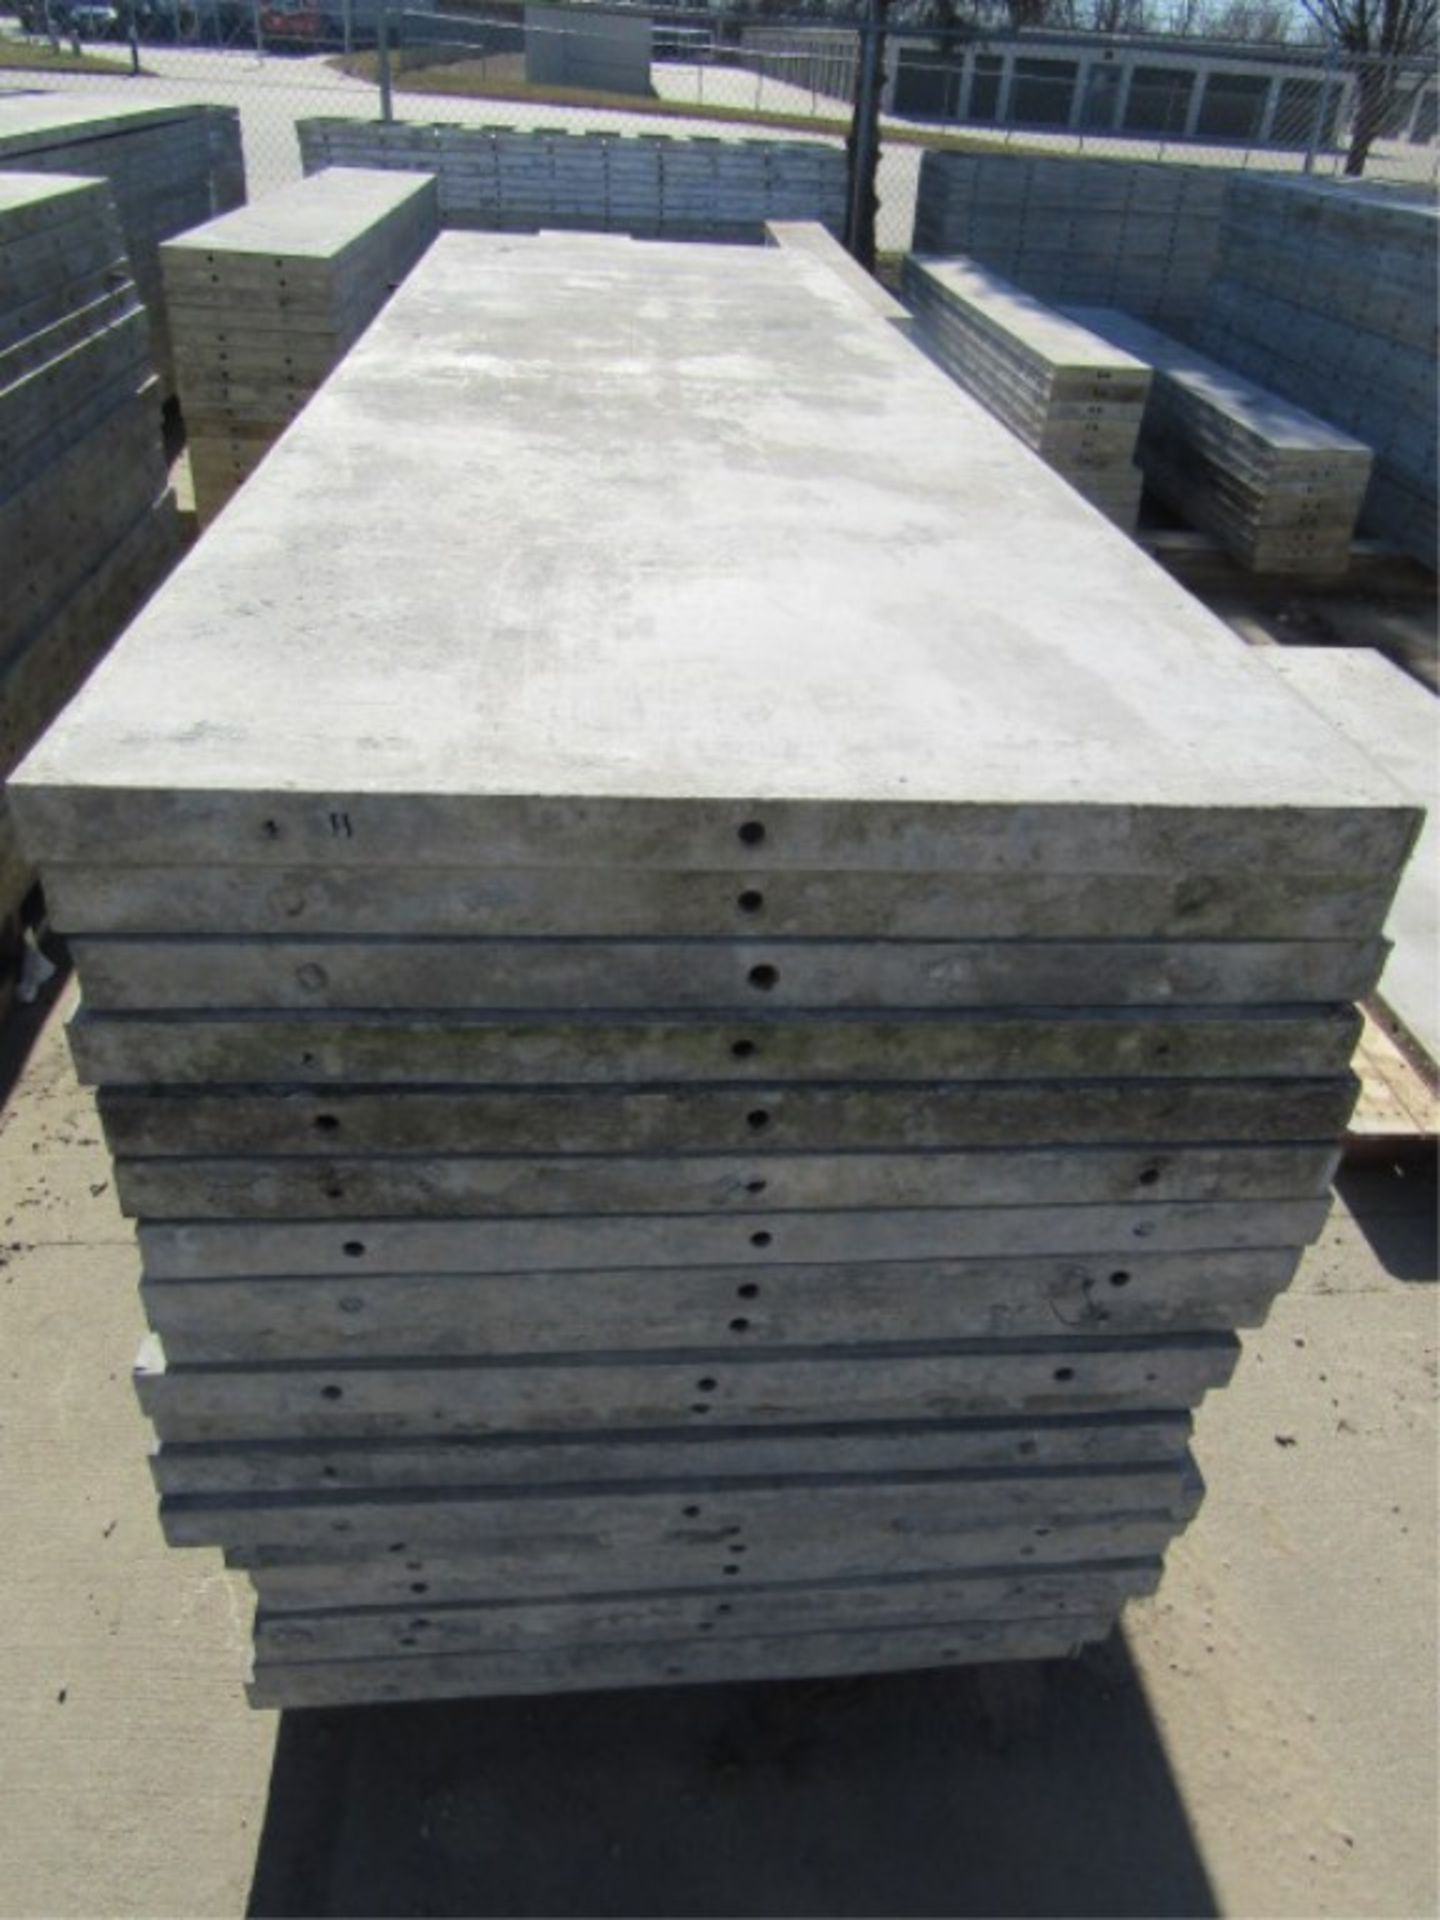 (20) 36" x 10' Wall-Ties/Precise Concrete Forms, Attached Hardware Smooth 6-12 Hole Pattern - Image 3 of 3